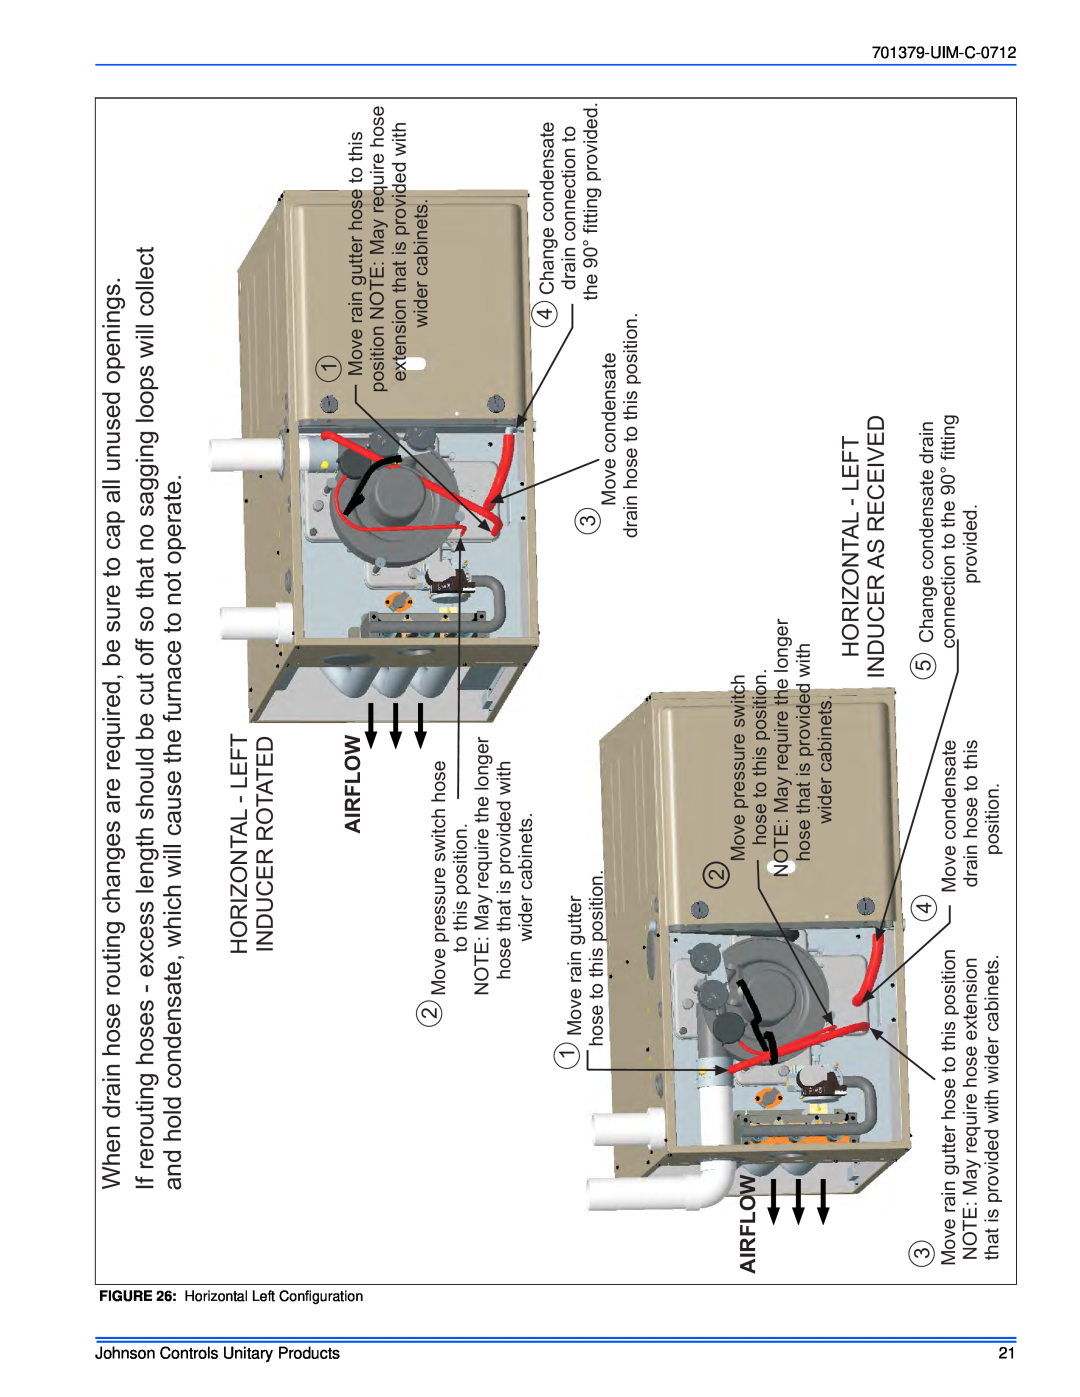 Johnson Controls TM9V*MP installation manual Horizontal - Left Inducer Rotated, Inducer As Received, Airflow 